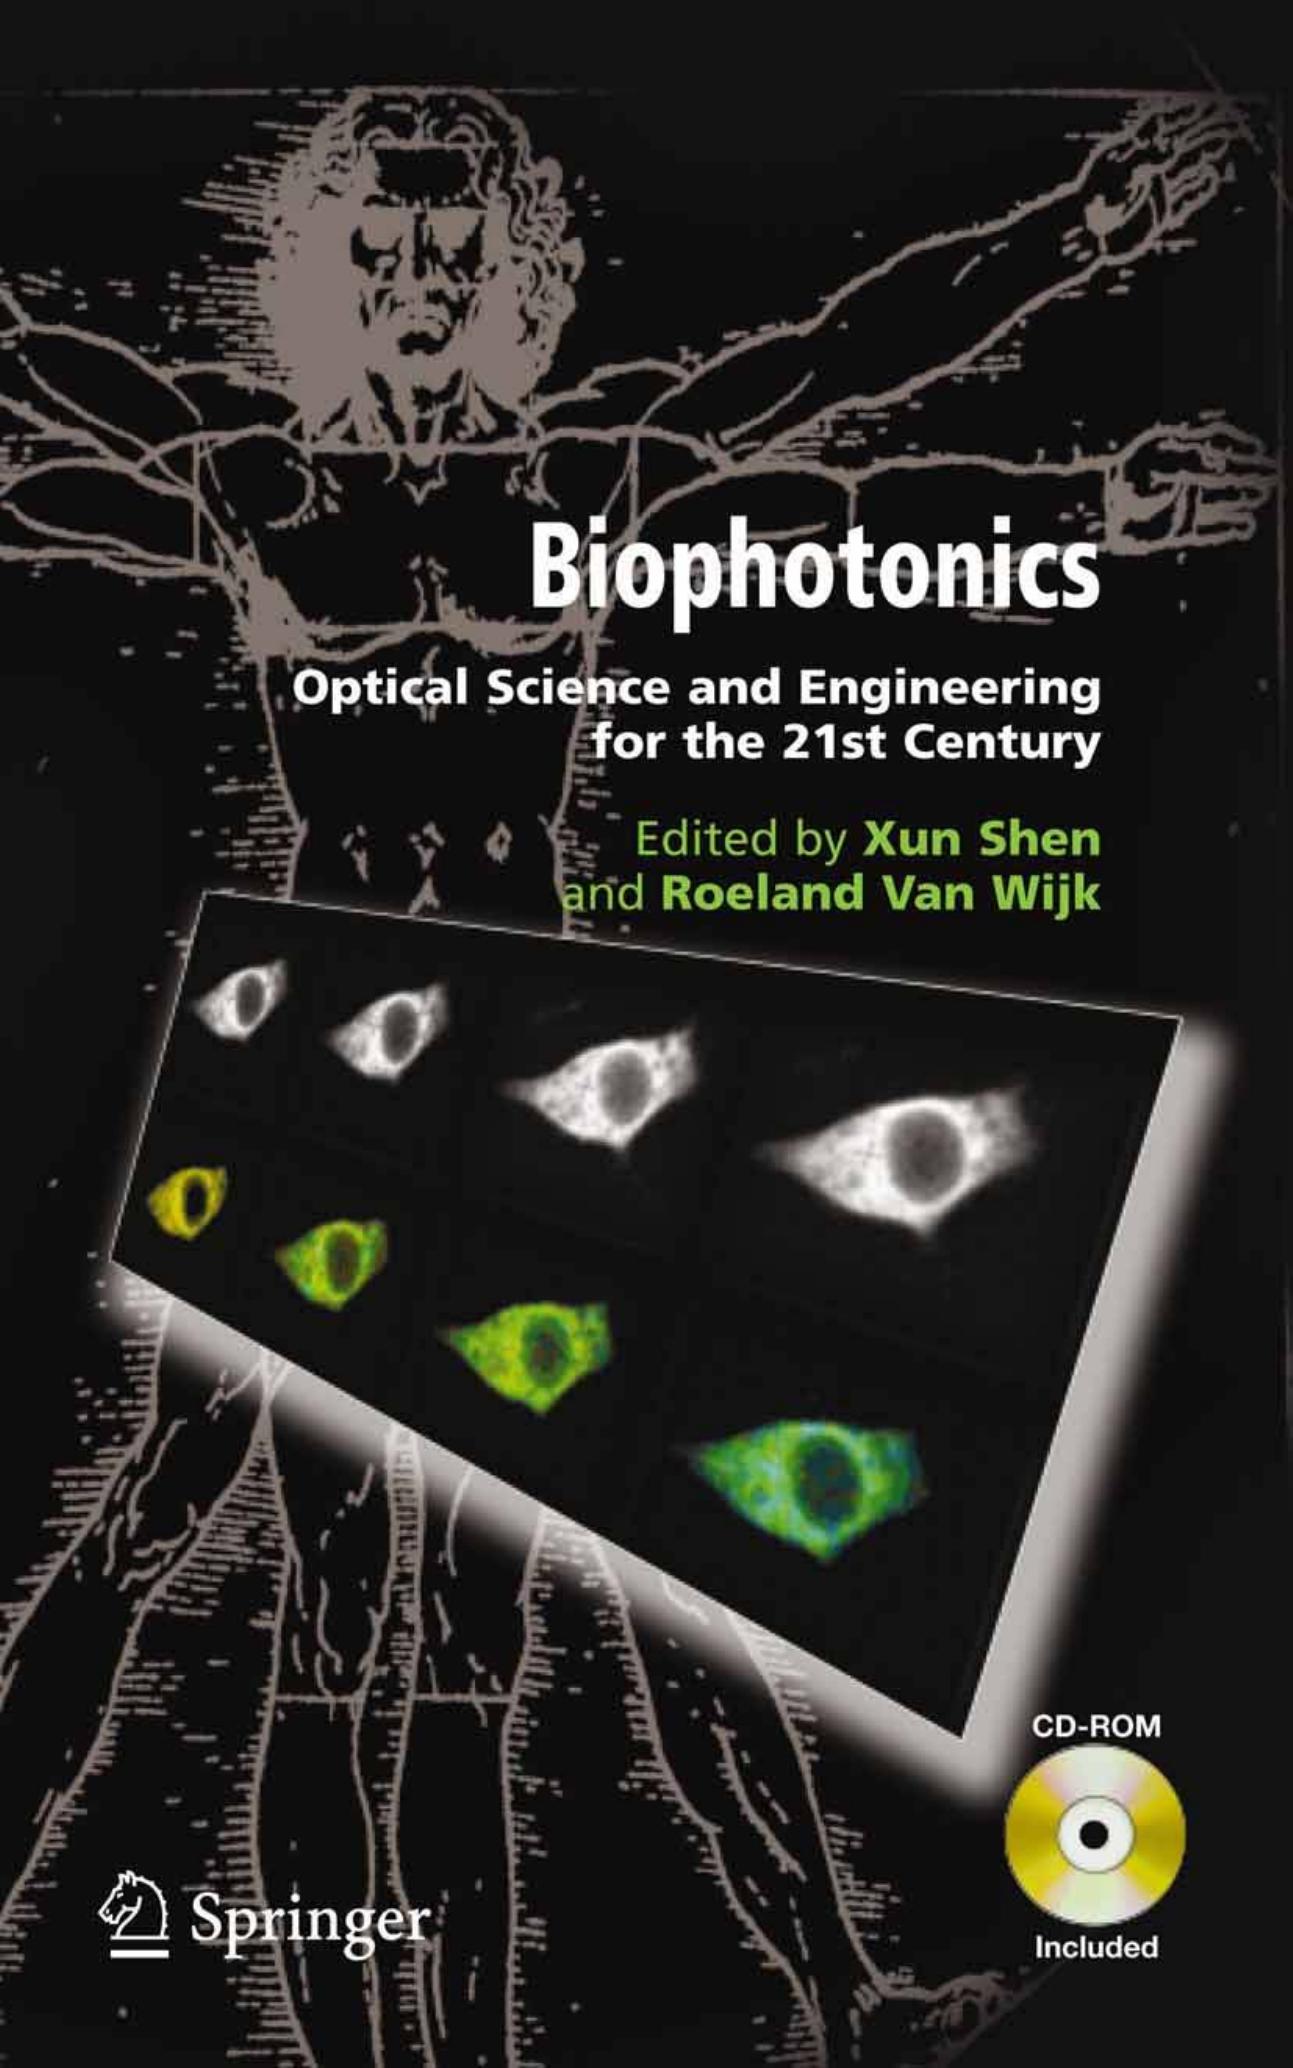 Biophotonics-Optical Science and Engineering for the 21st Century